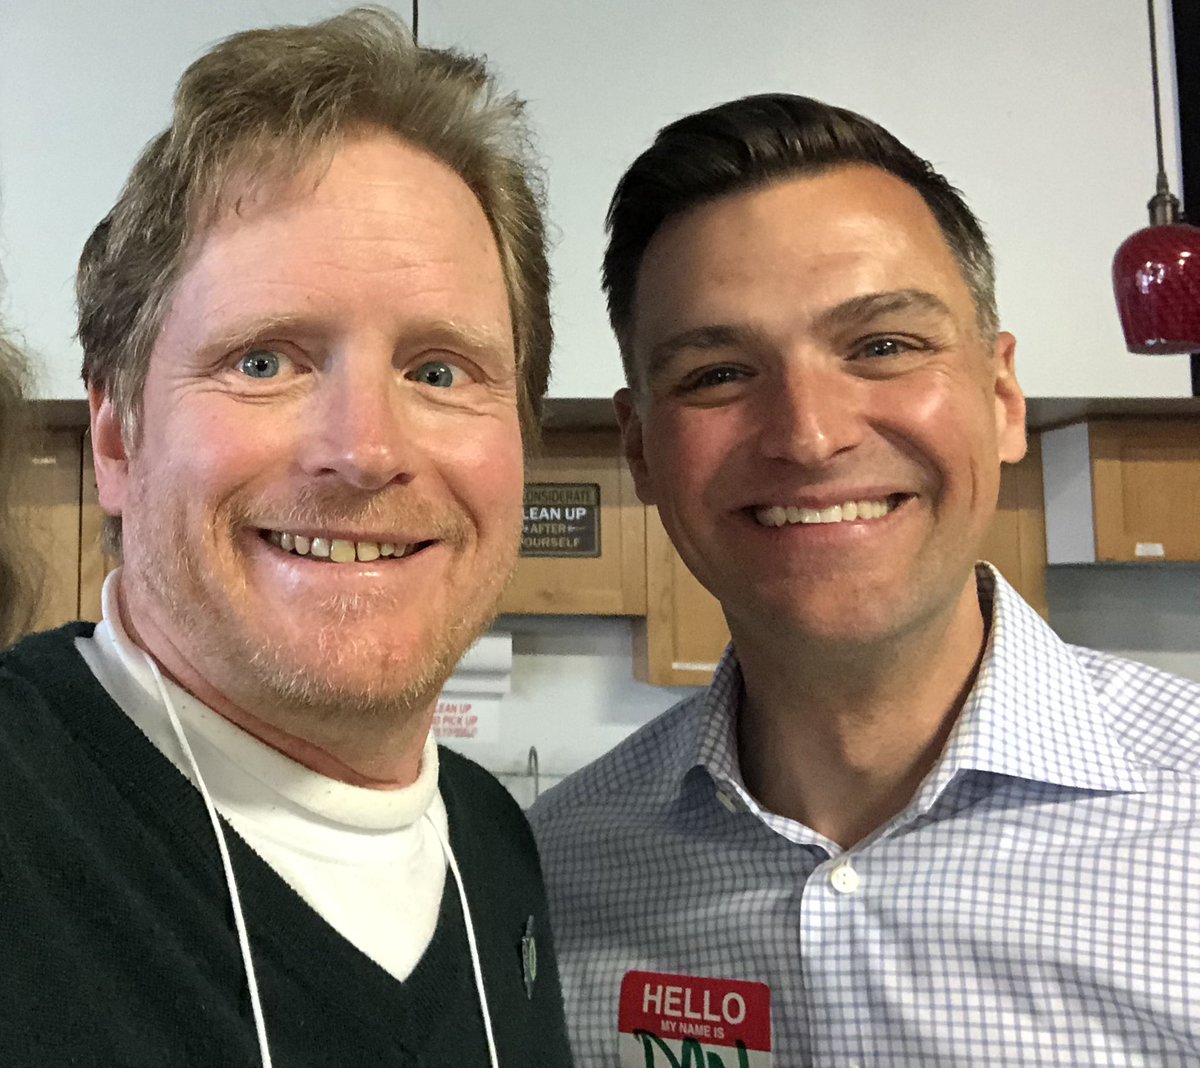 For #ORClimateAction, Great to see former Oregon Speaker of the House @DanRayfield for Oregon Attorney General at @multdems Candidate-A-Palooza event today. #ORpol